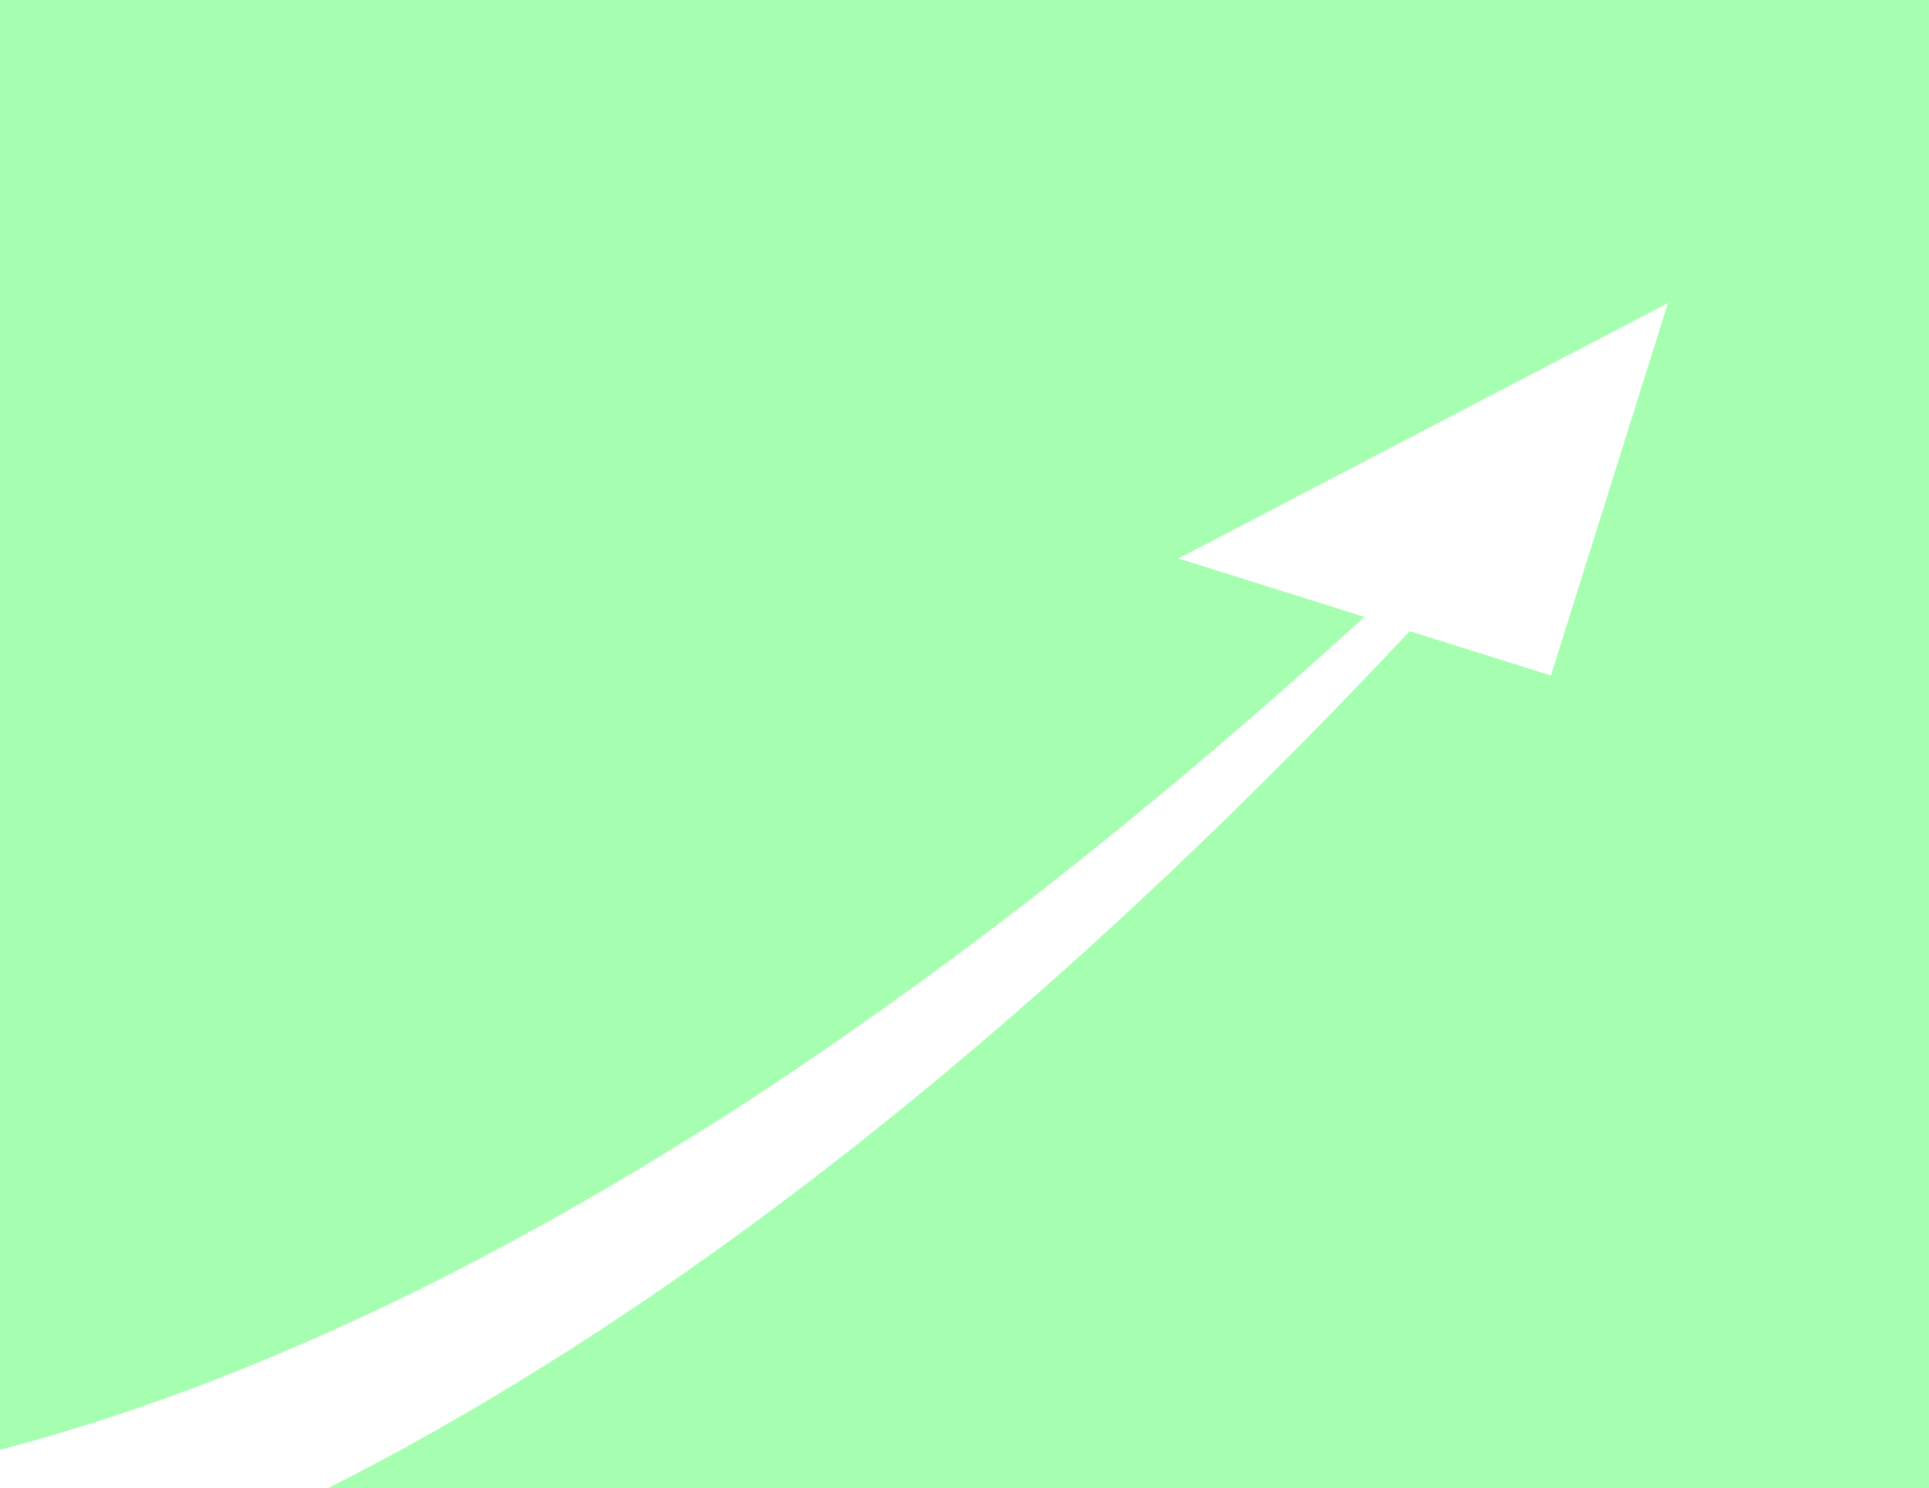 Image of a white arrow on a green background